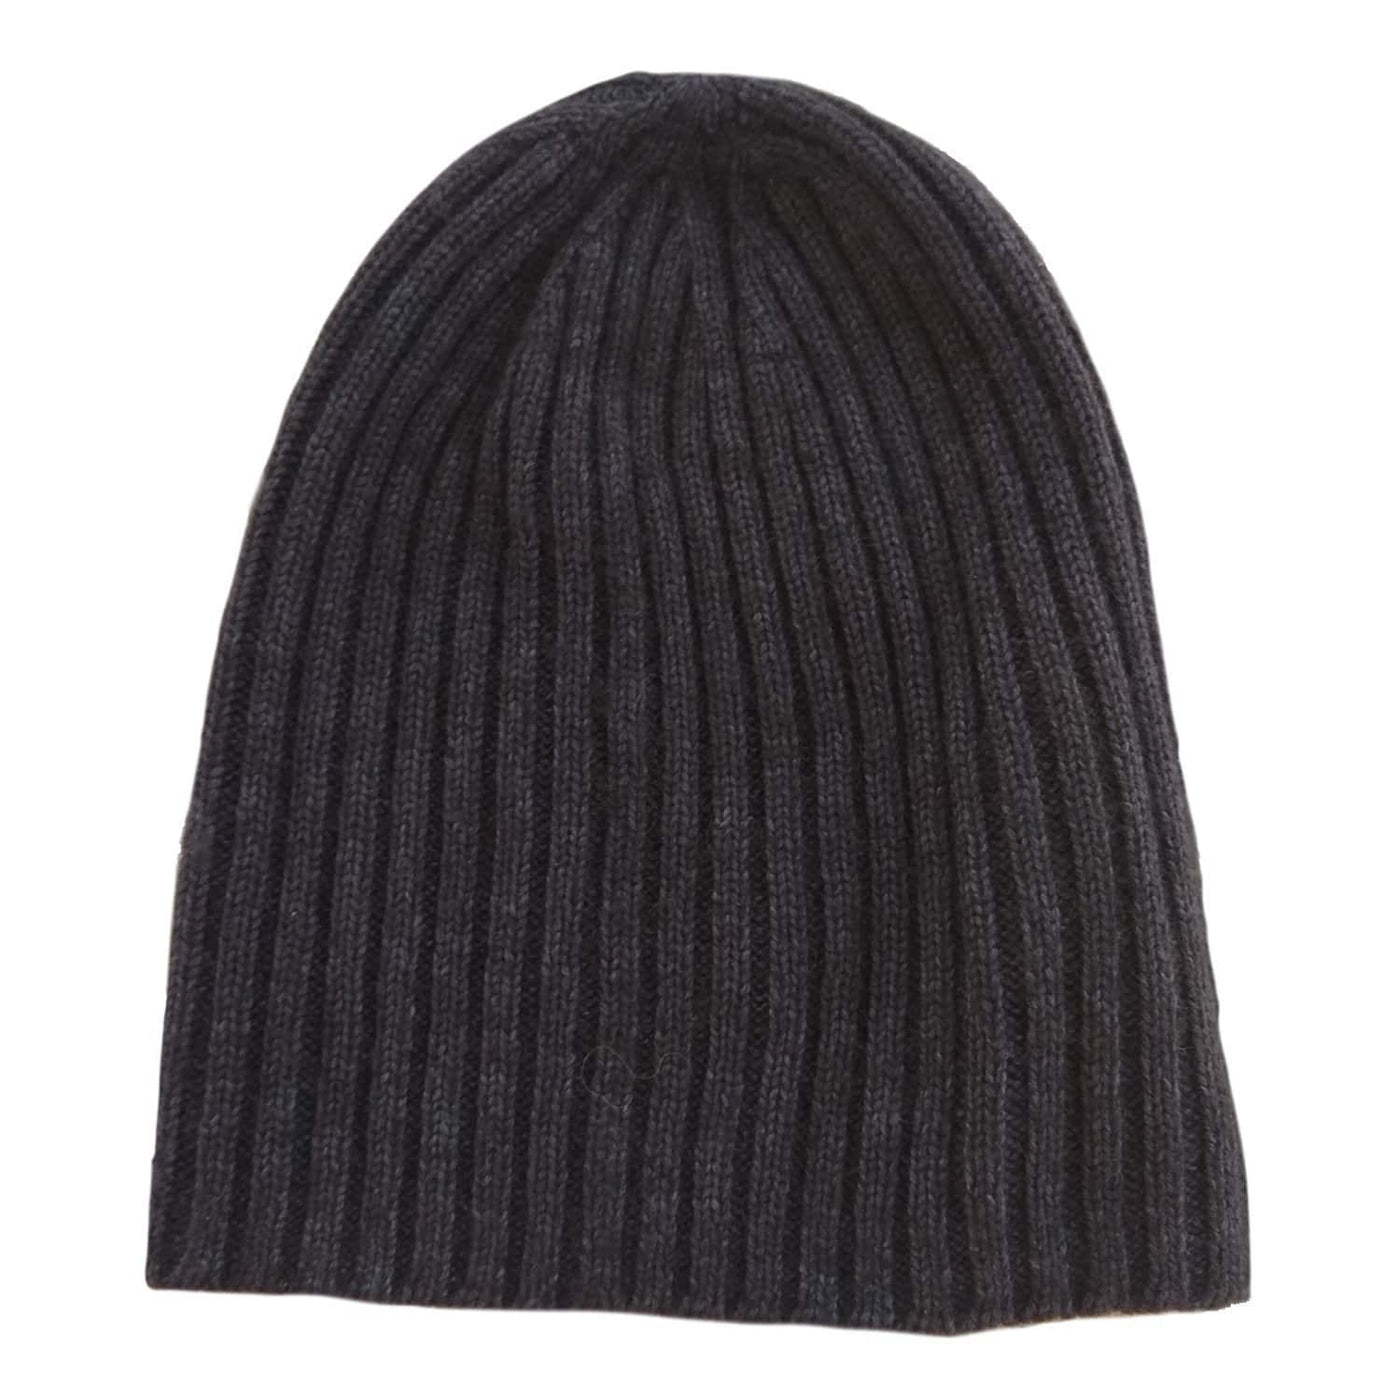 Ribbed Bison/Silk Knitted Hat Bison Gear The Buffalo Wool Co. Charcoal 